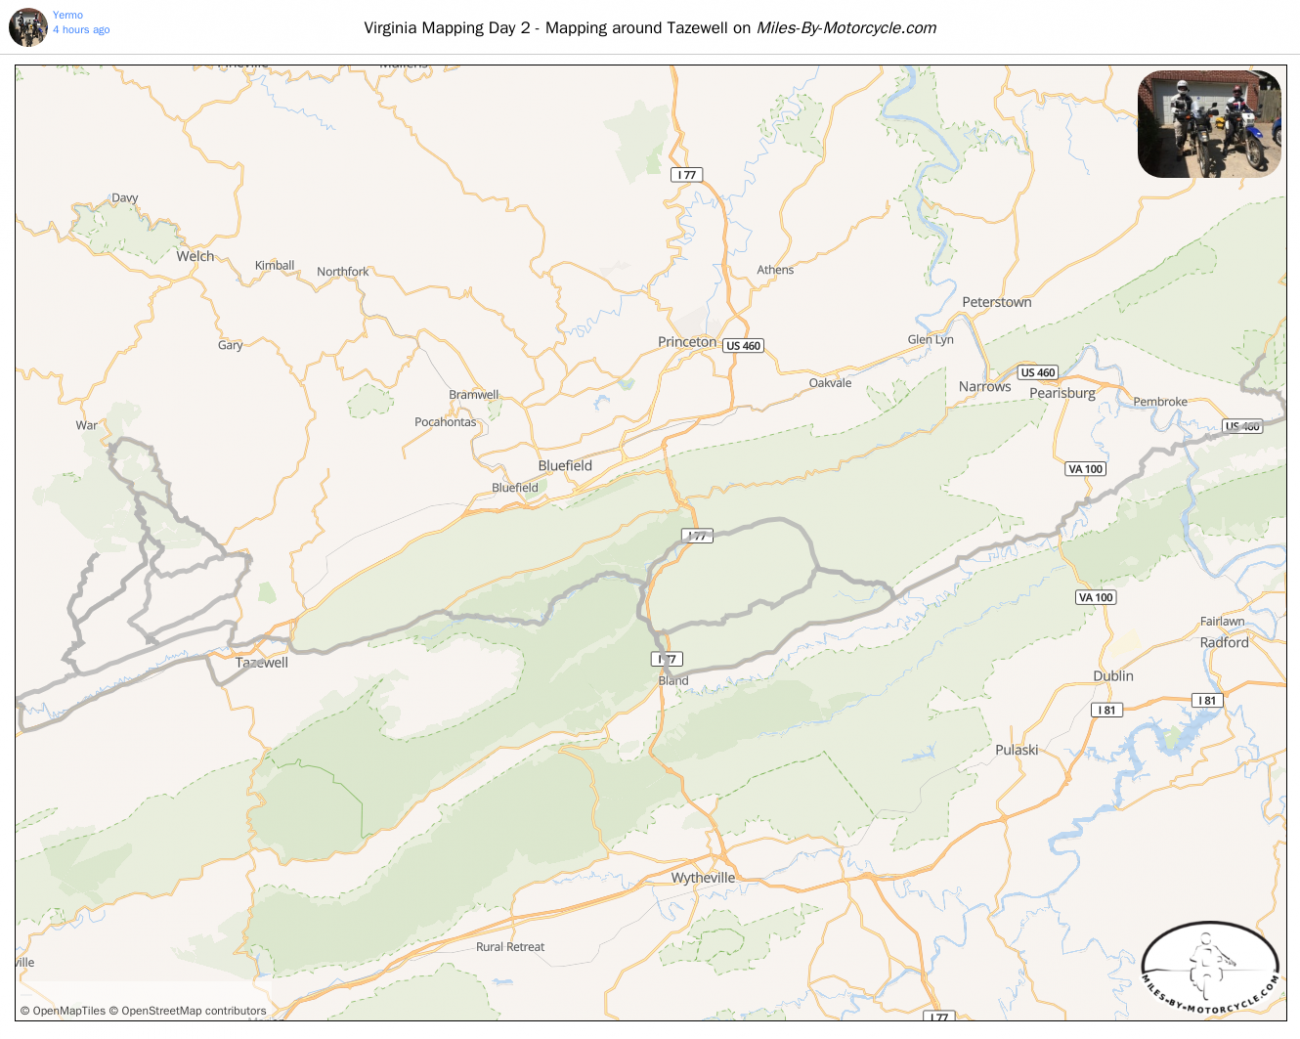 Virginia Mapping Day 2 - Mapping around Tazewell